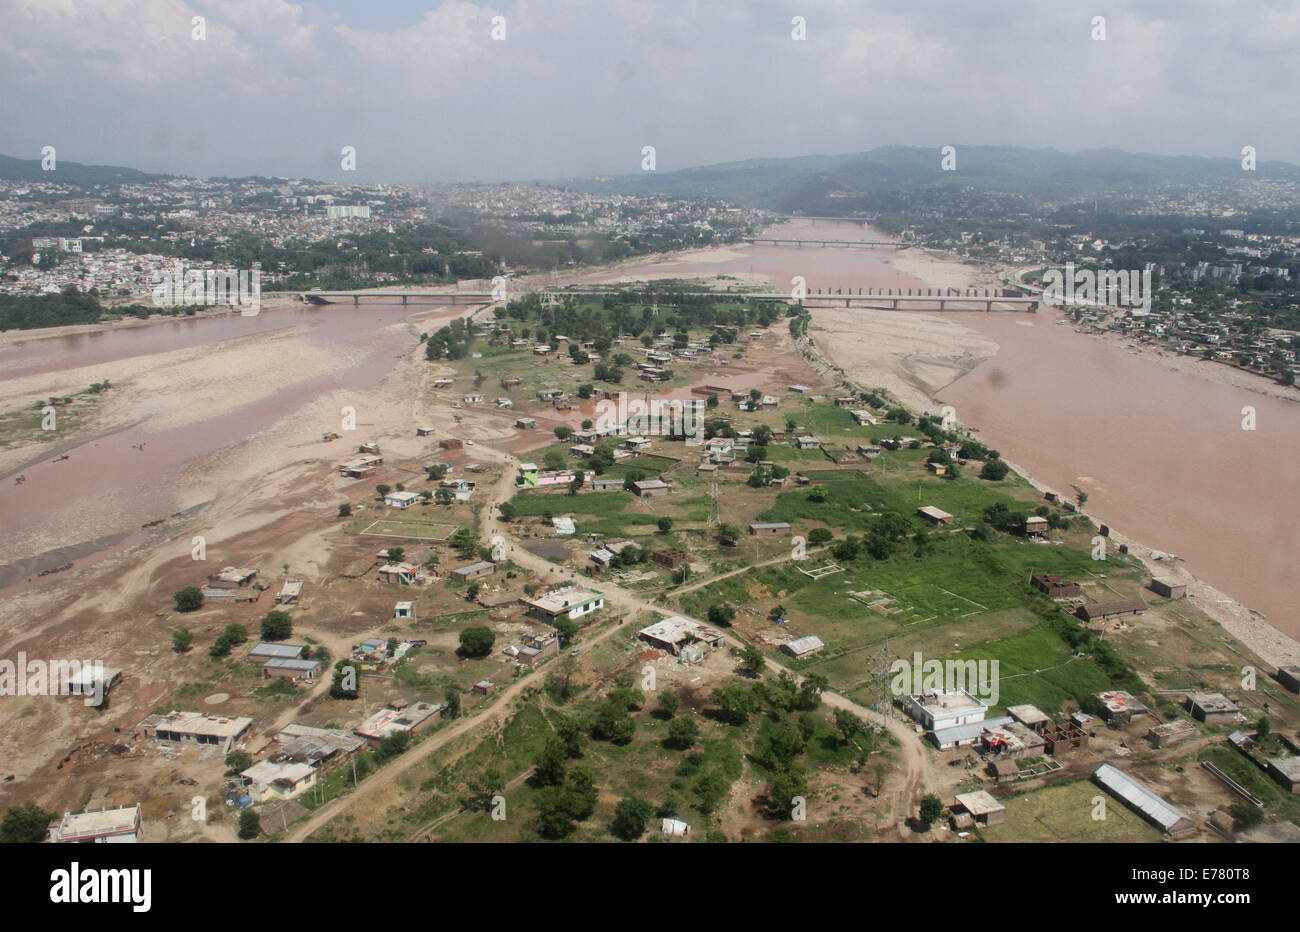 Jammu. 8th Sep, 2014. Photo taken on Sept. 8, 2014 shows an aerial view of the flood-hit area and a badly damaged bridge across the Tawi River in Jammu, India. At least 160 people have been killed in flood related incidents, according to official accounts. © Stringer/Xinhua/Alamy Live News Stock Photo